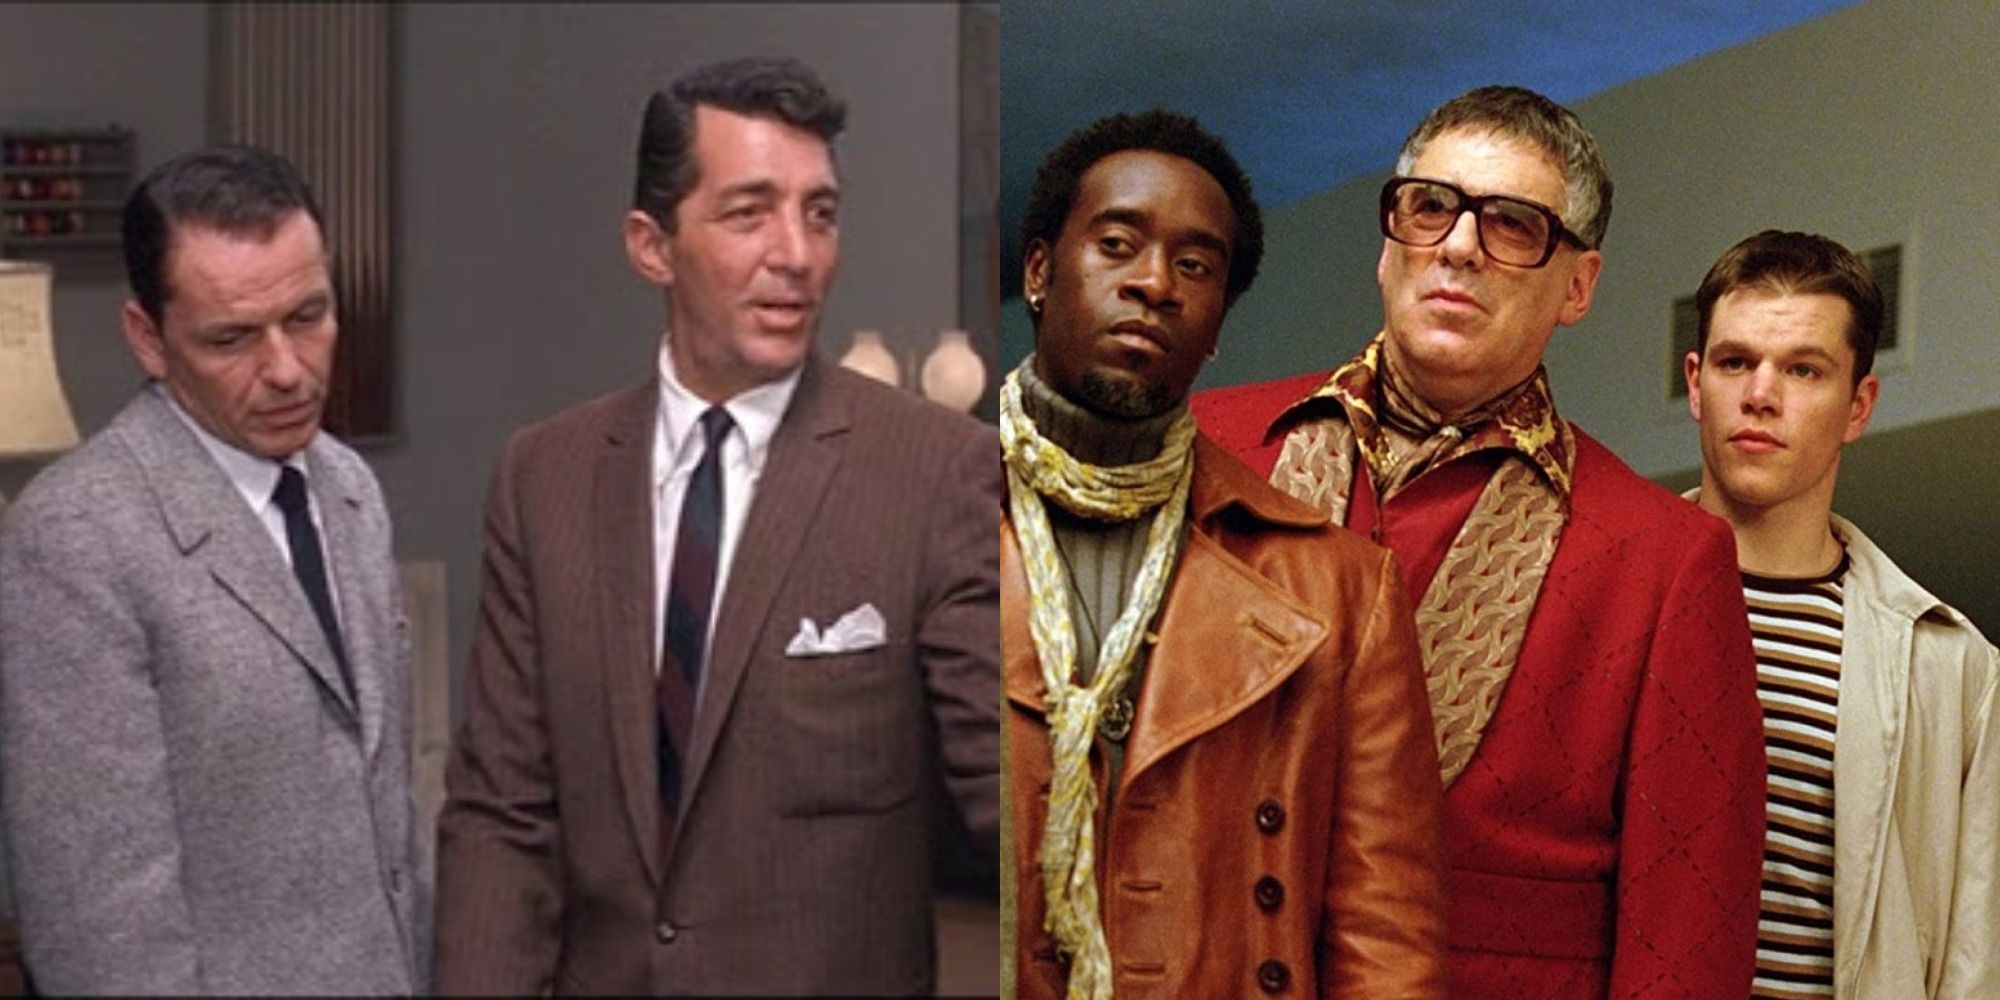 Two side by side images from the original Ocean's 11 movie and the remake